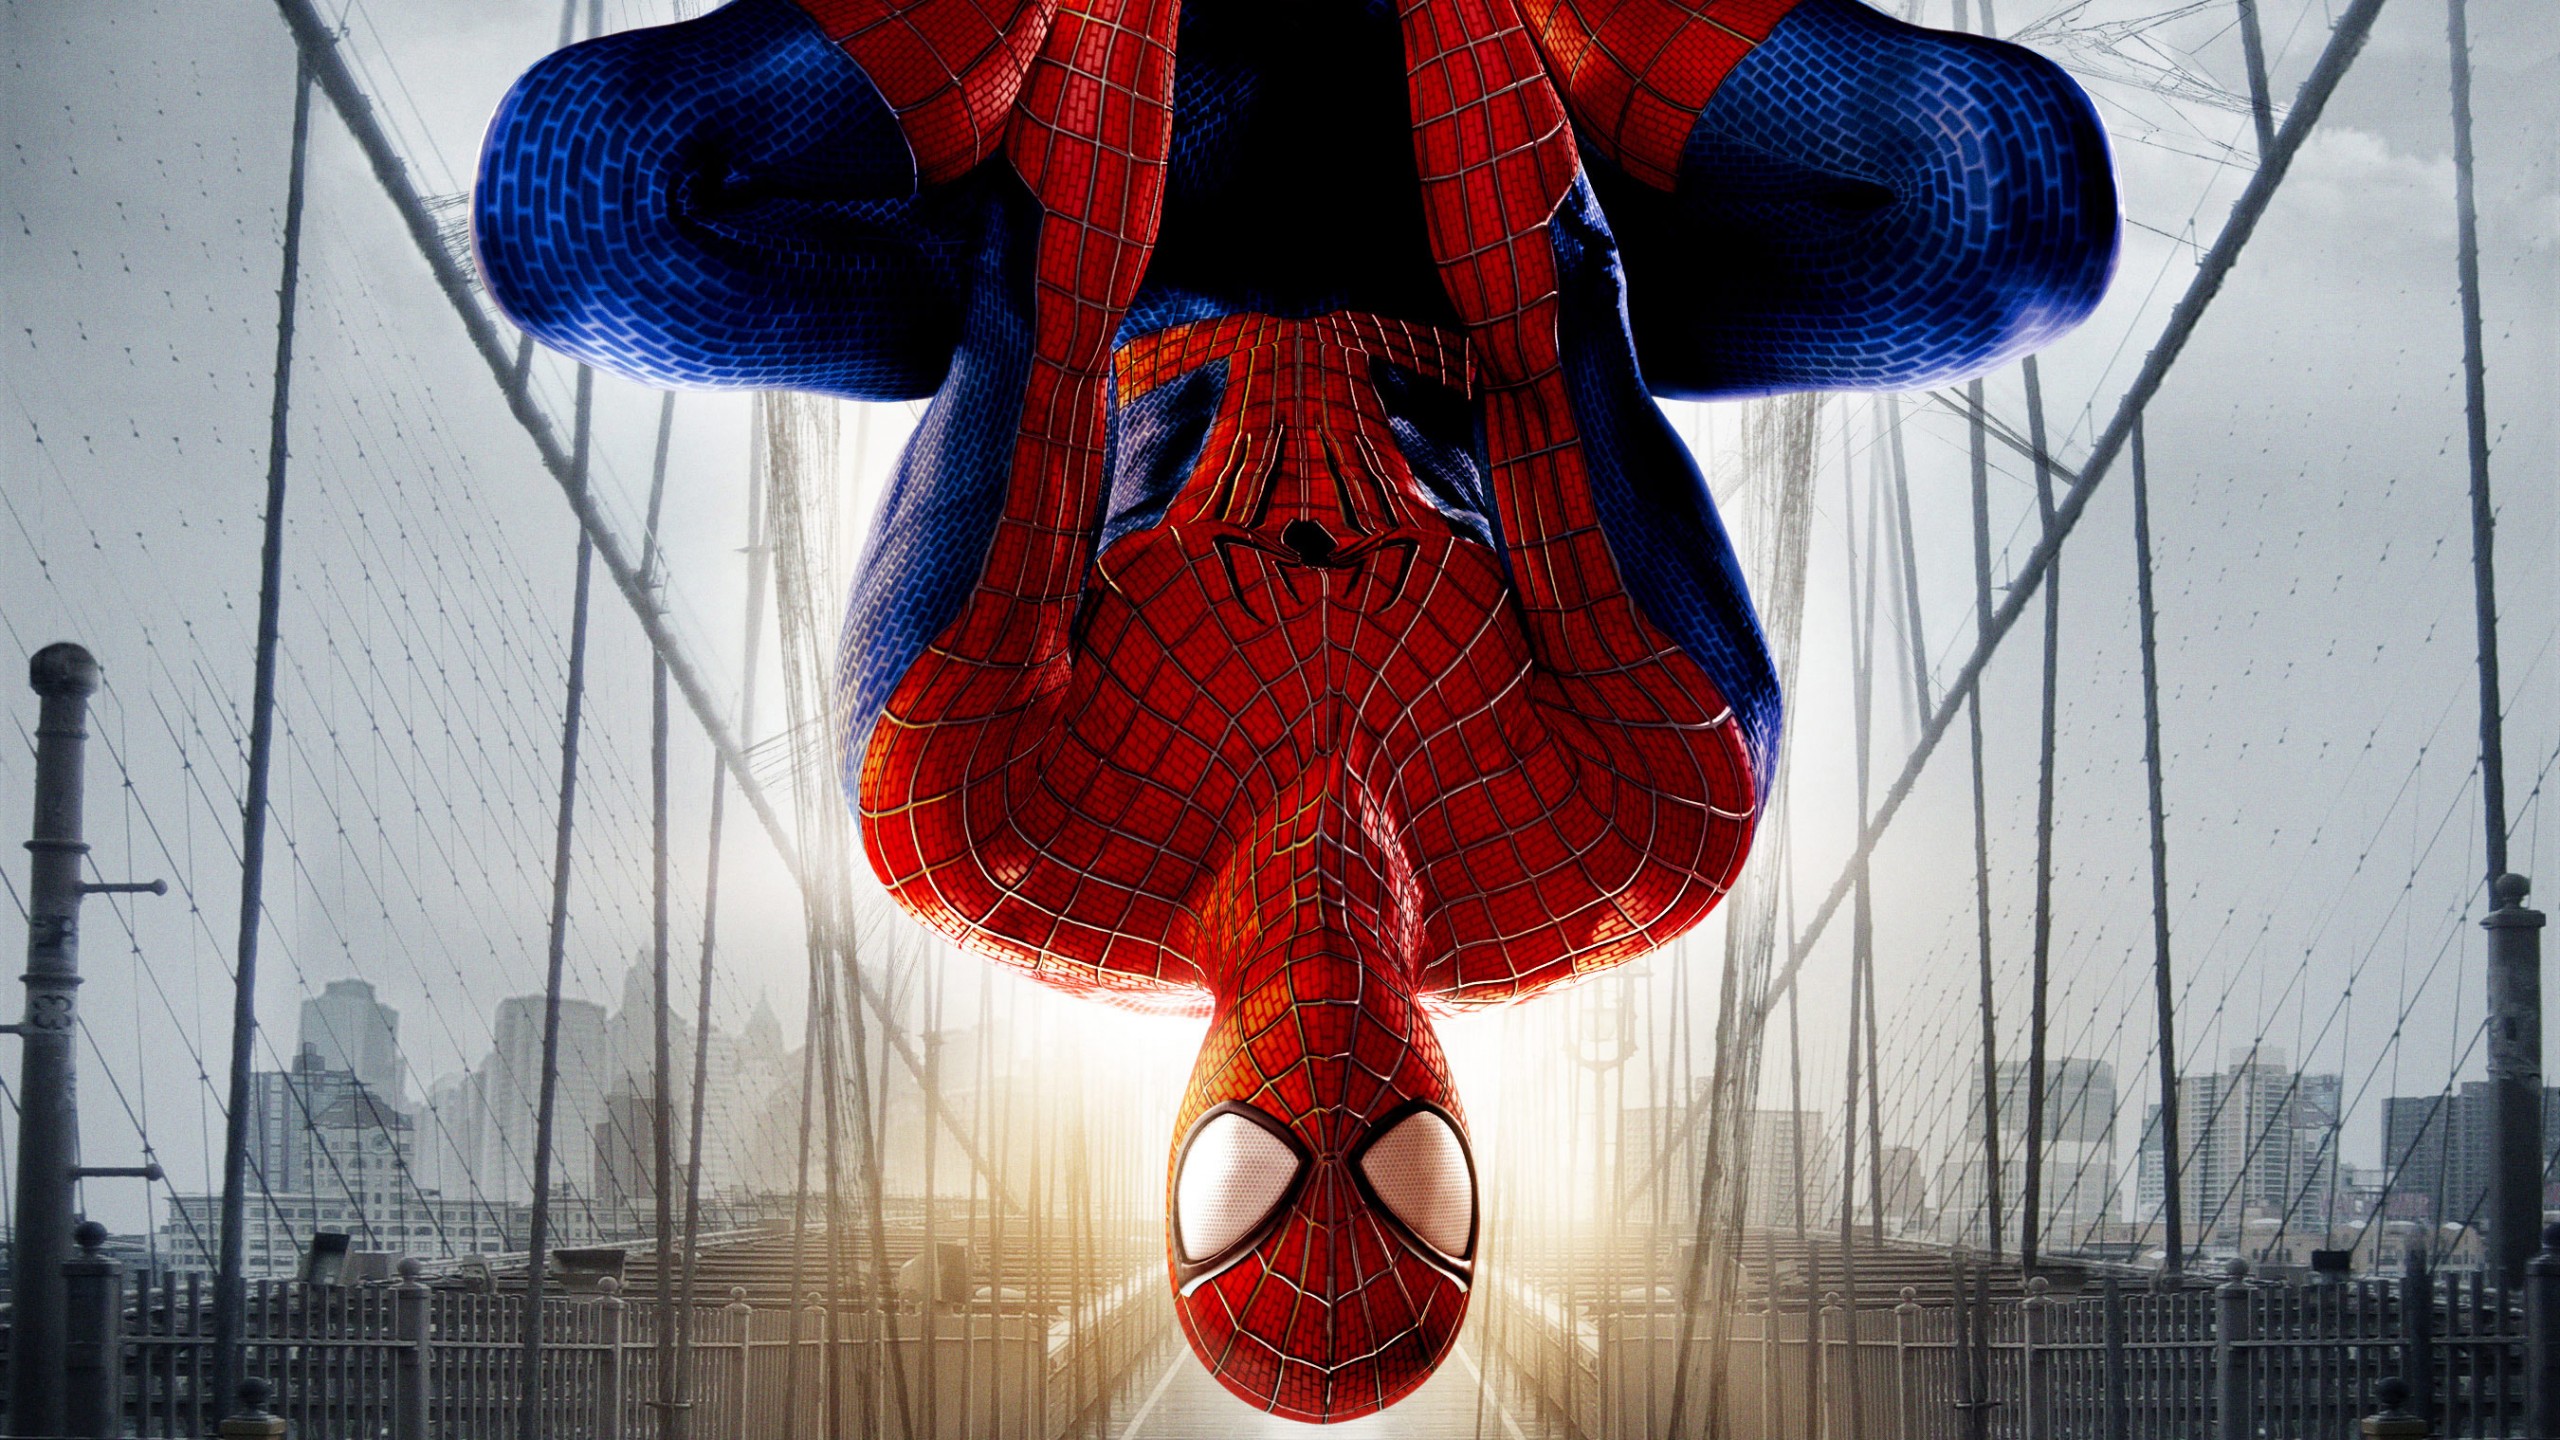 amazing wallpapers for walls,red,blue,spider man,footwear,fictional character